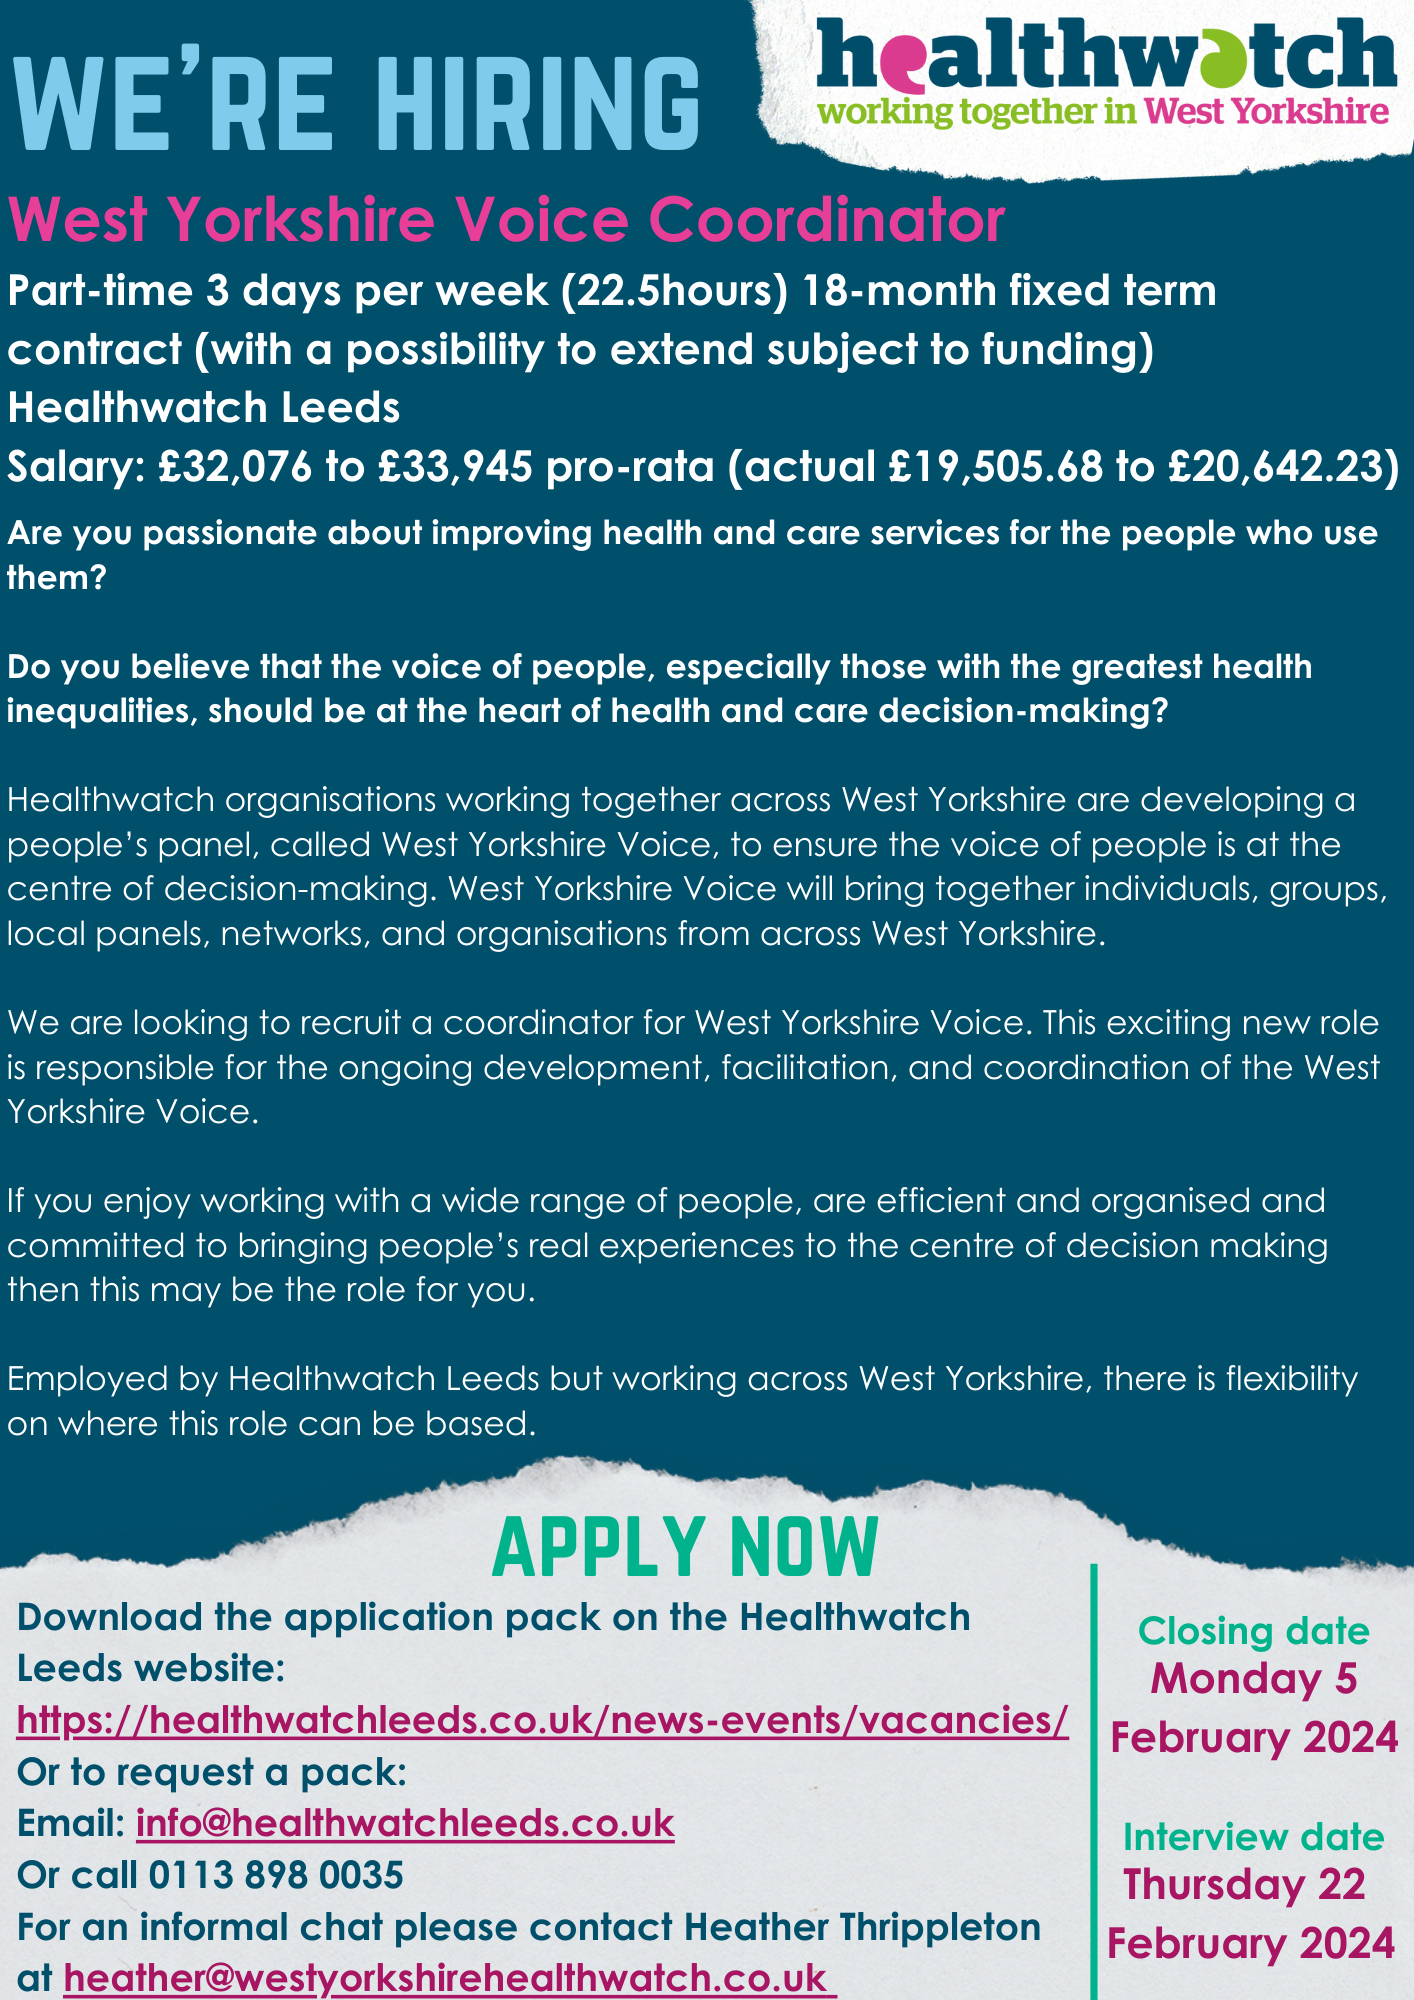 Advert for West Yorkshire Voice Coordinator role